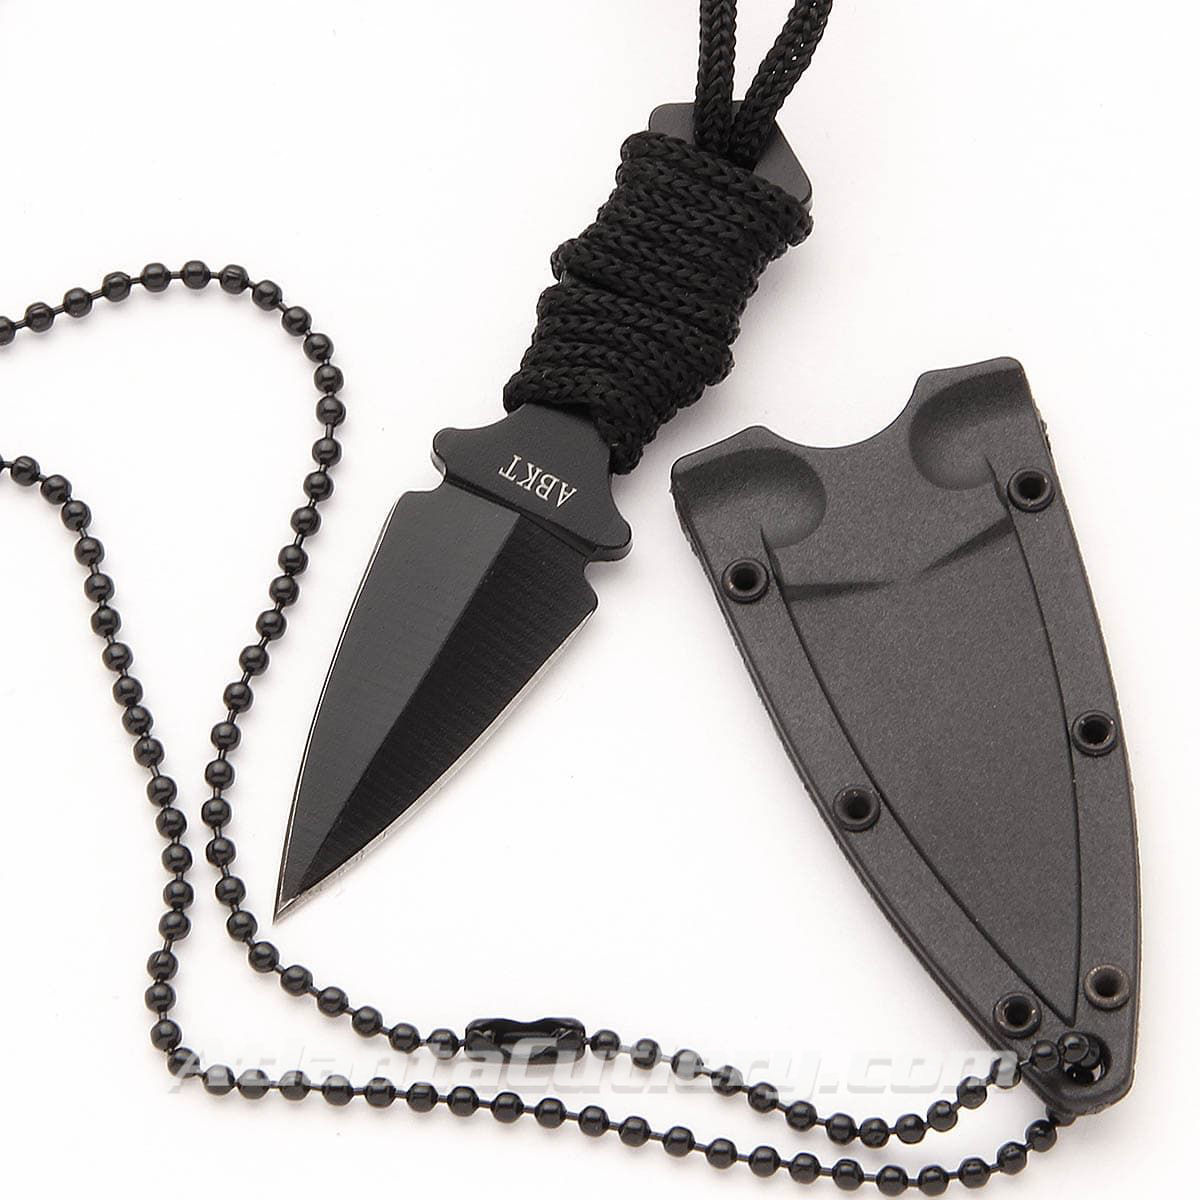 Covert Ops Double Edged Neck Knife with Sheath and Bead Chain